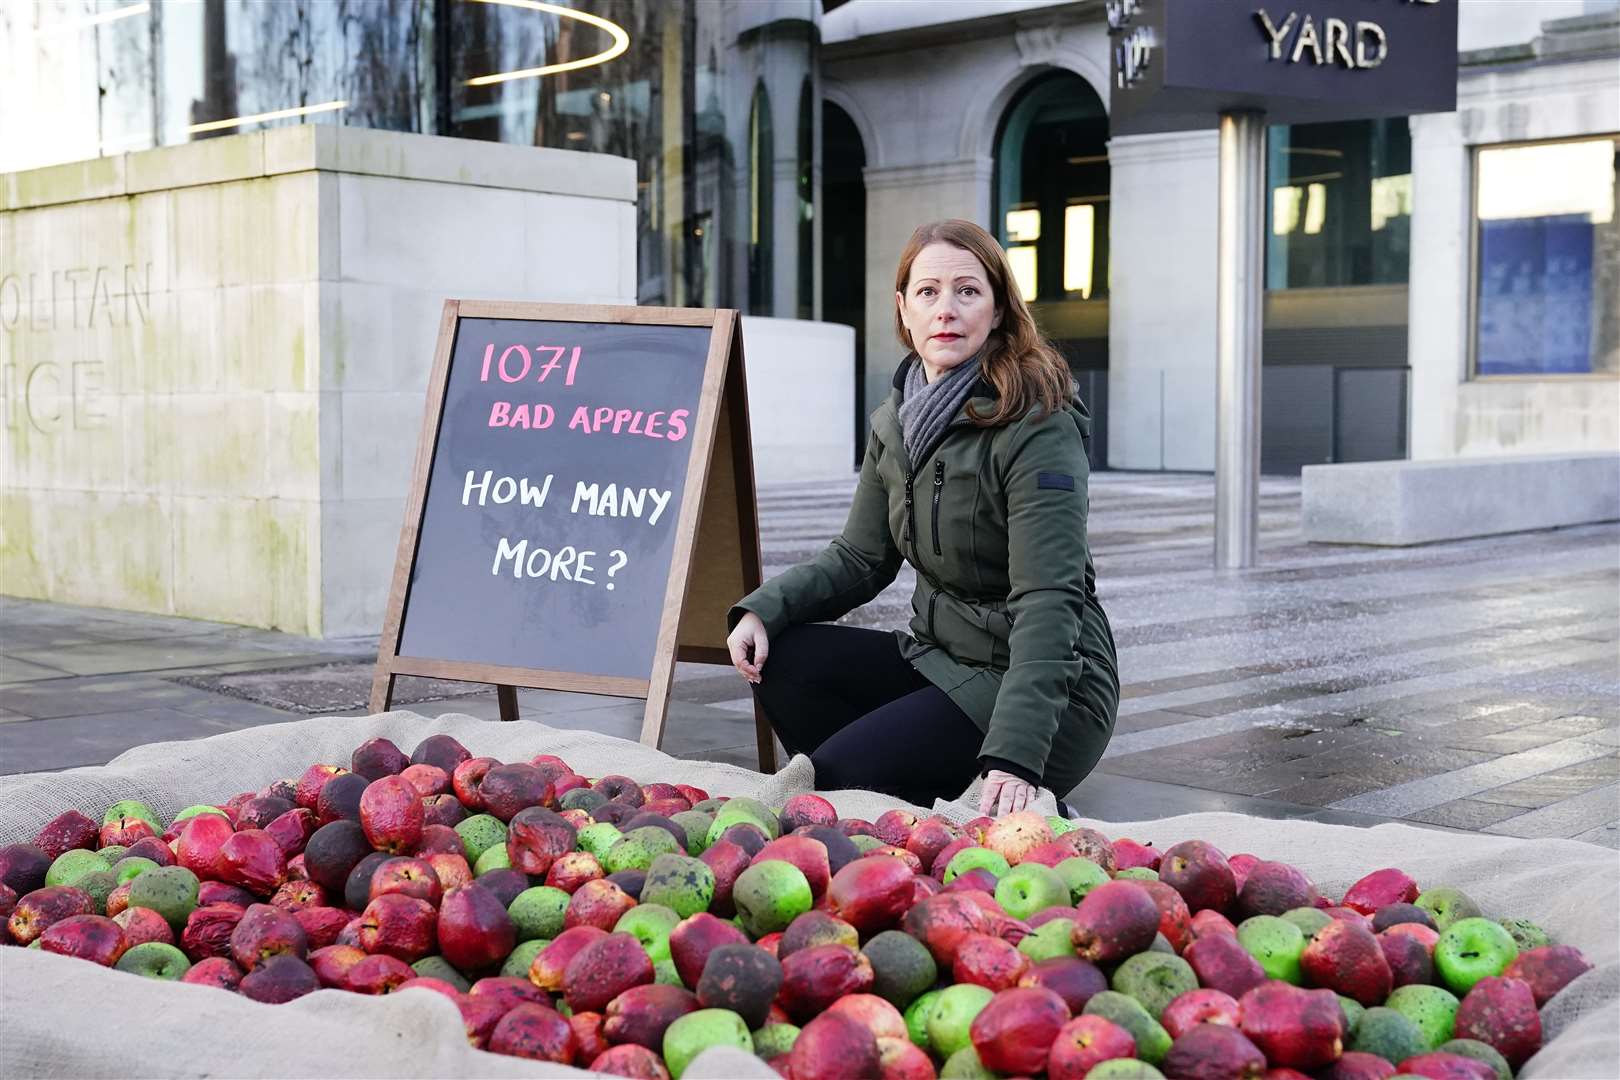 Refuge chief executive Ruth Davison helps place 1,071 rotten apples outside New Scotland Yard (Aaron Chown/PA)